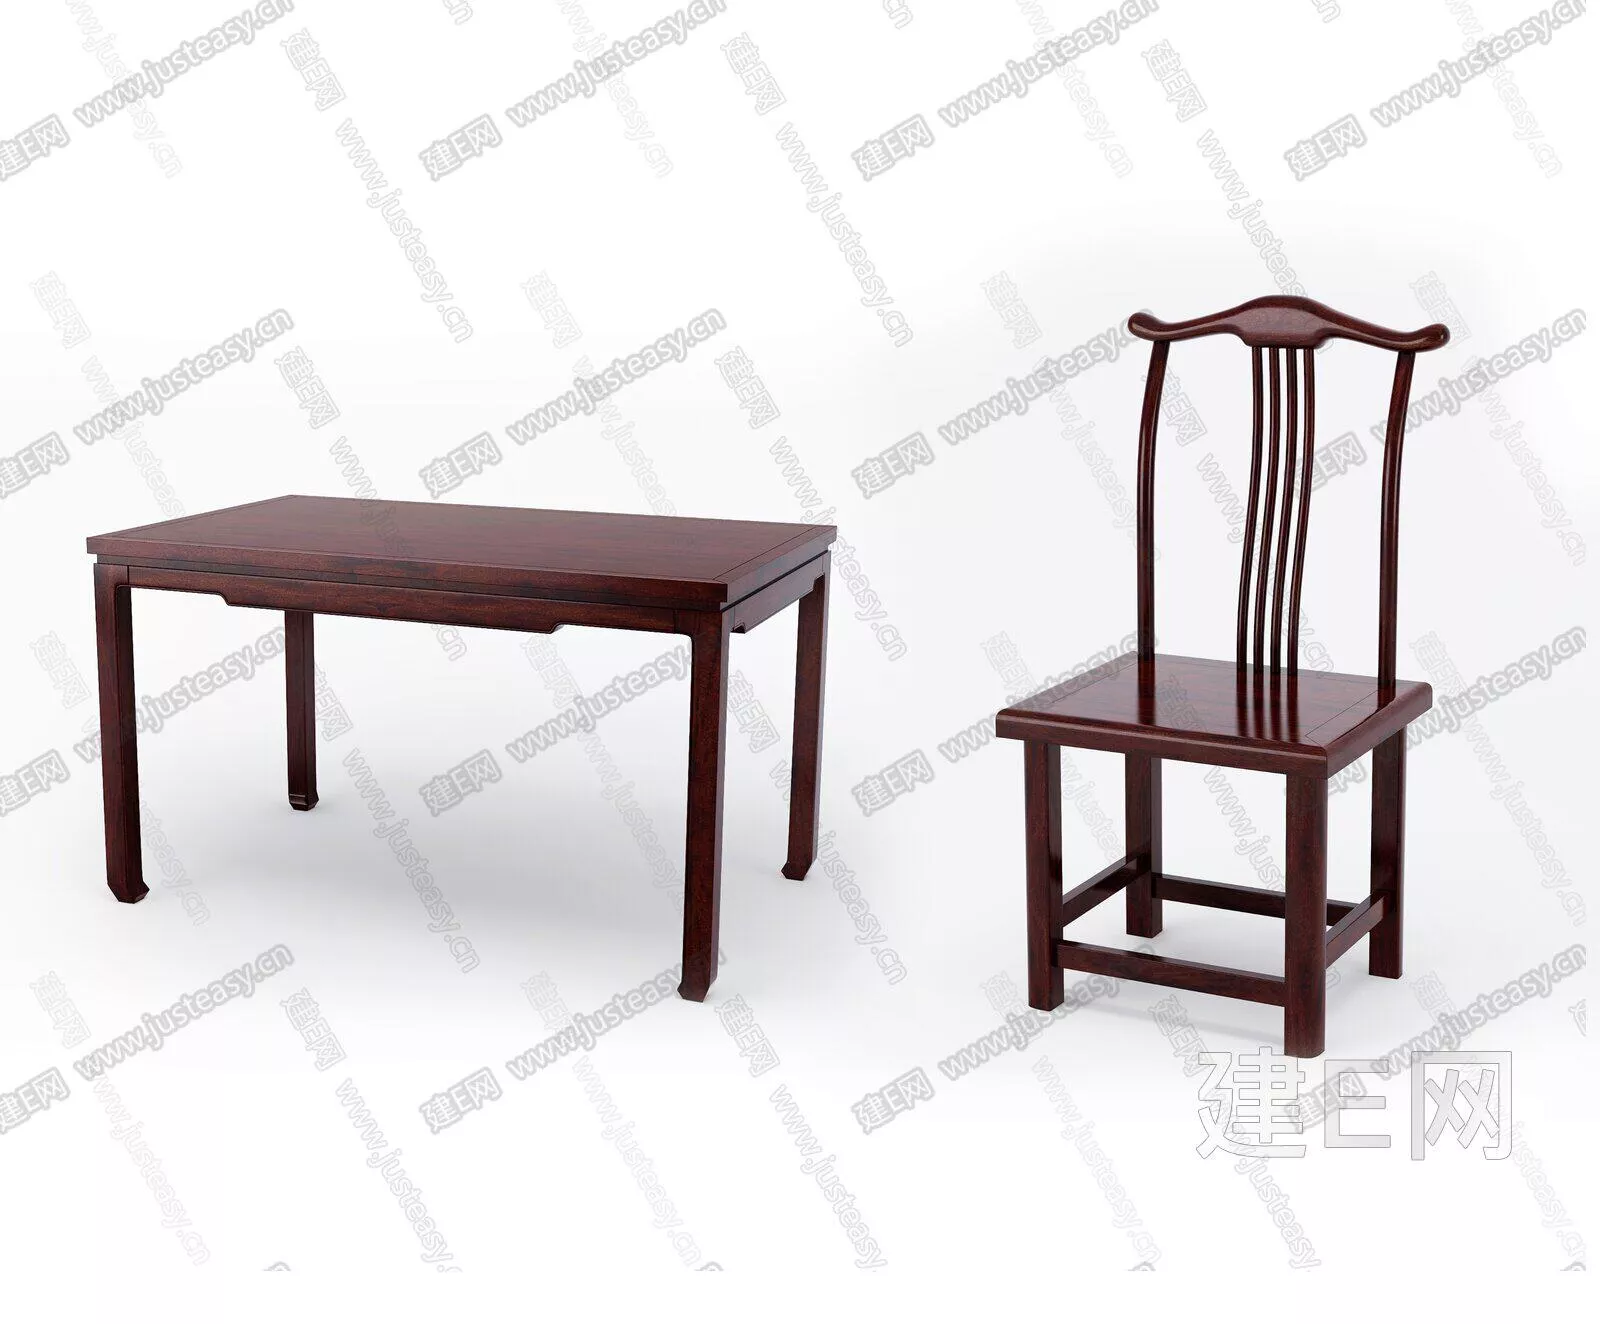 CHINESE DINING TABLE SET - SKETCHUP 3D MODEL - ENSCAPE - 112414061